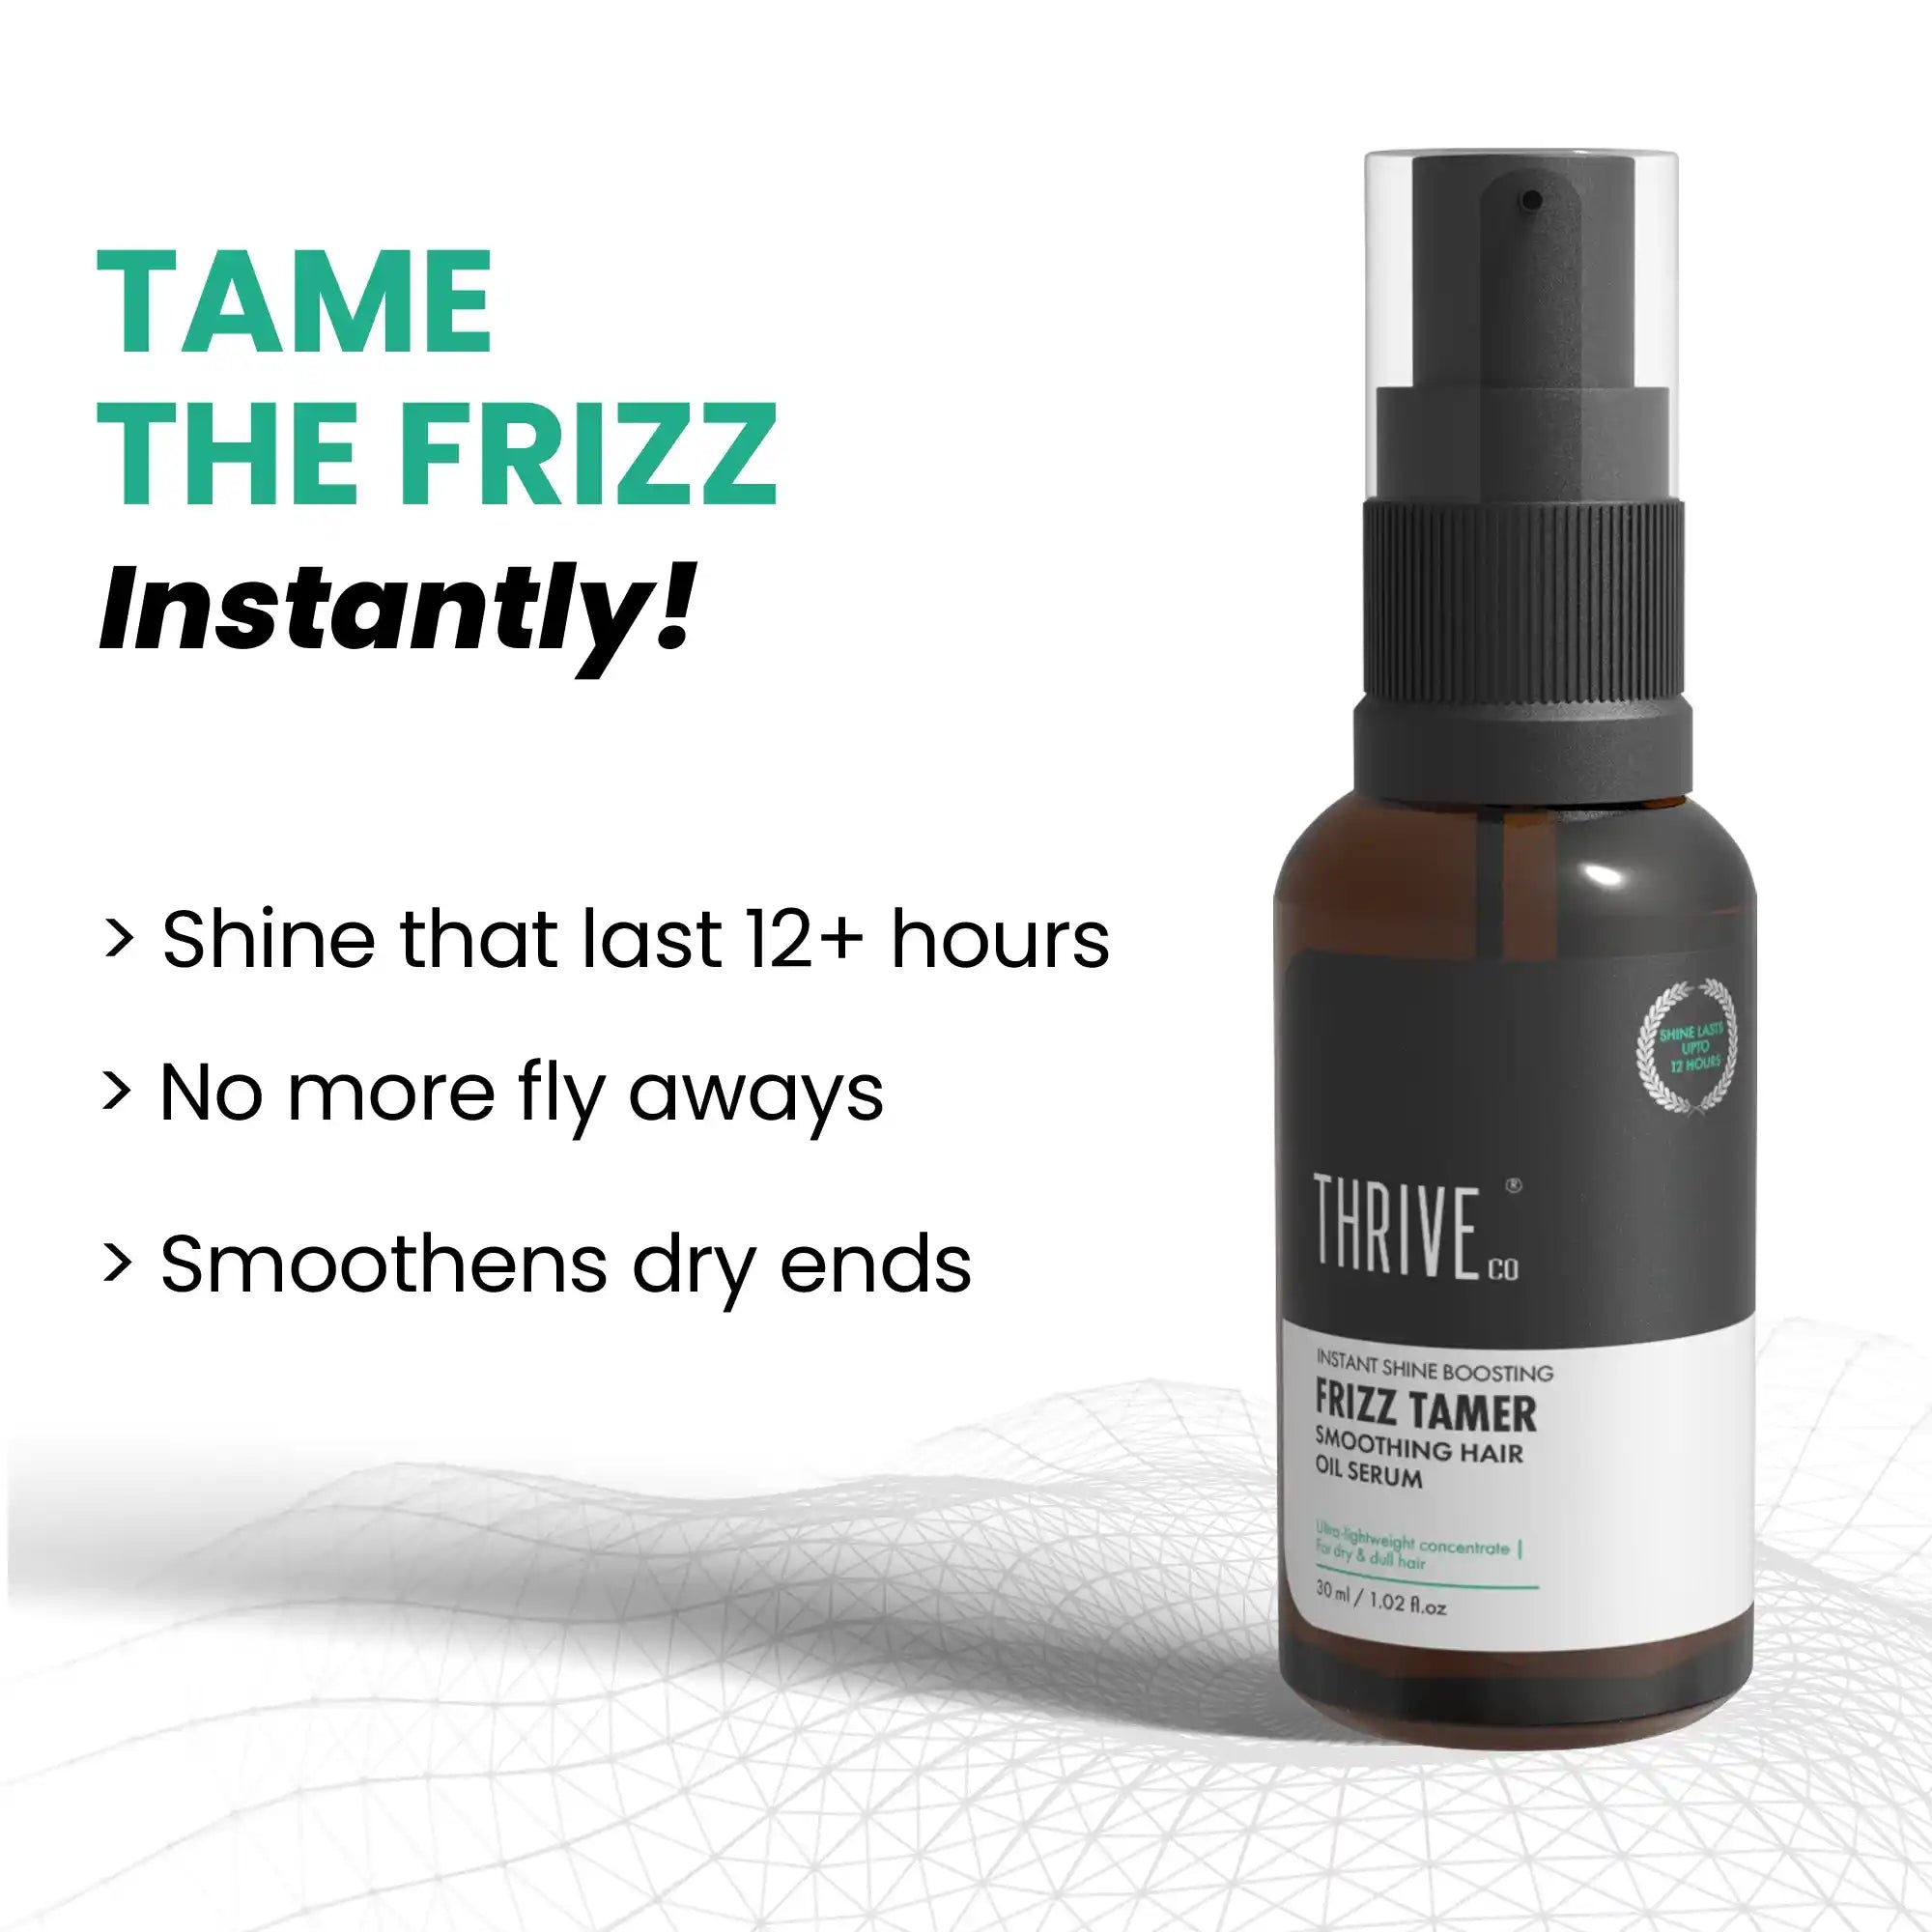 ThriveCo Frizz Tamer Smoothing Hair Serum for frizzy hair